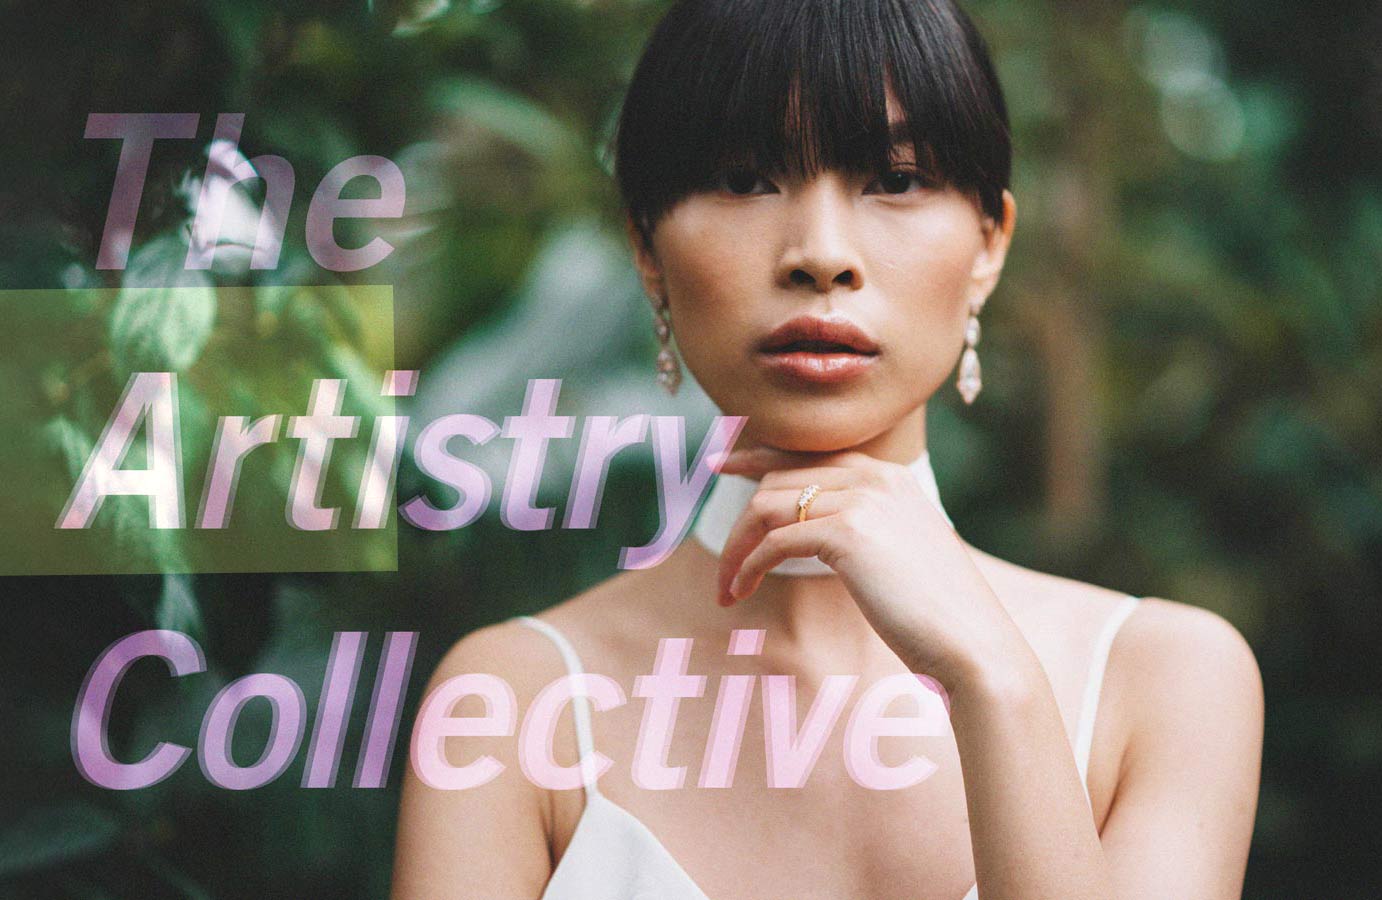 Vancouver’s Elite Makeup team: The Artistry Collective